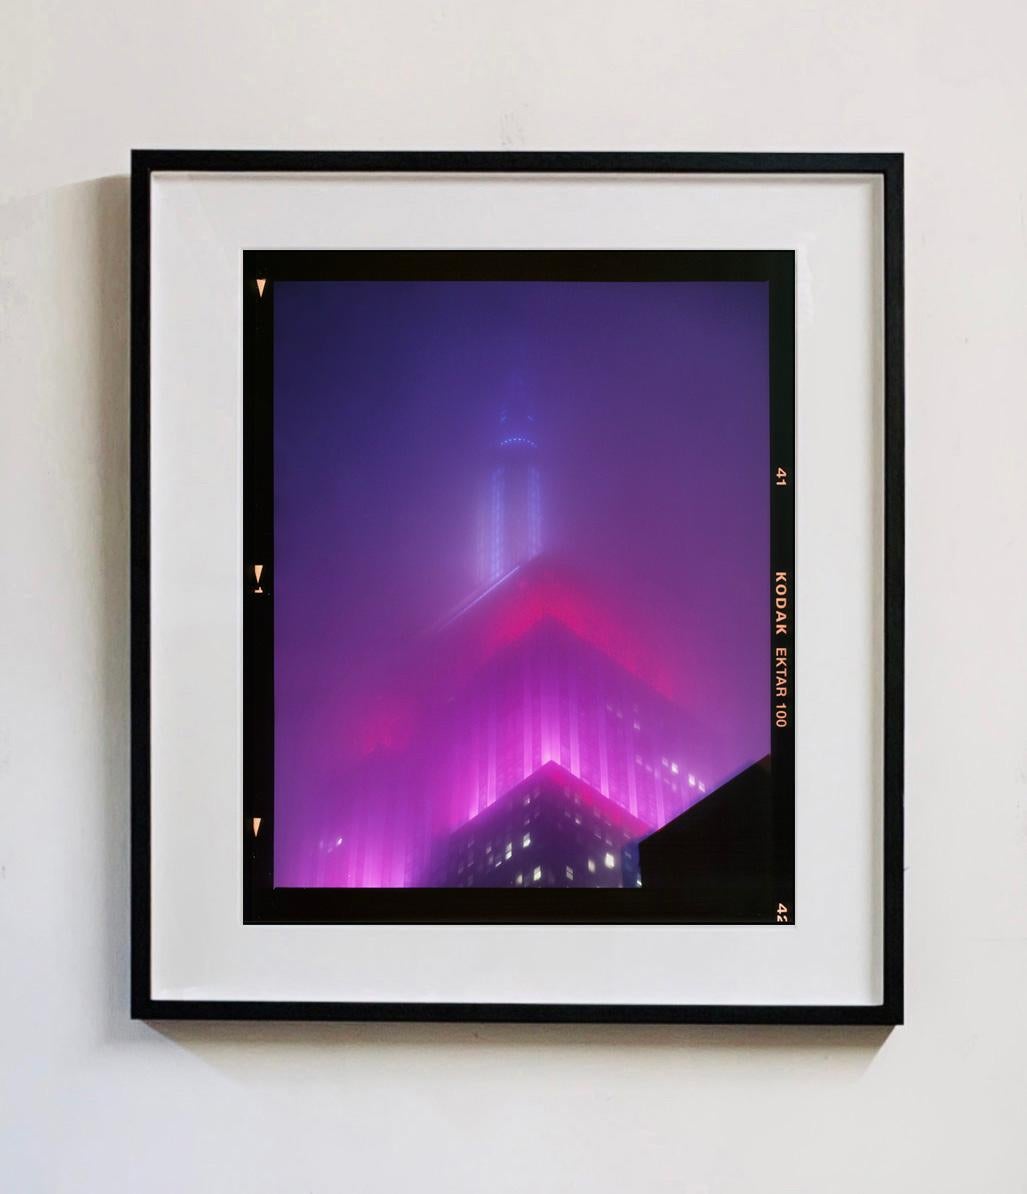 NOMAD V (Film Rebate), New York - Conceptual Architectural Color Photography - Print by Richard Heeps